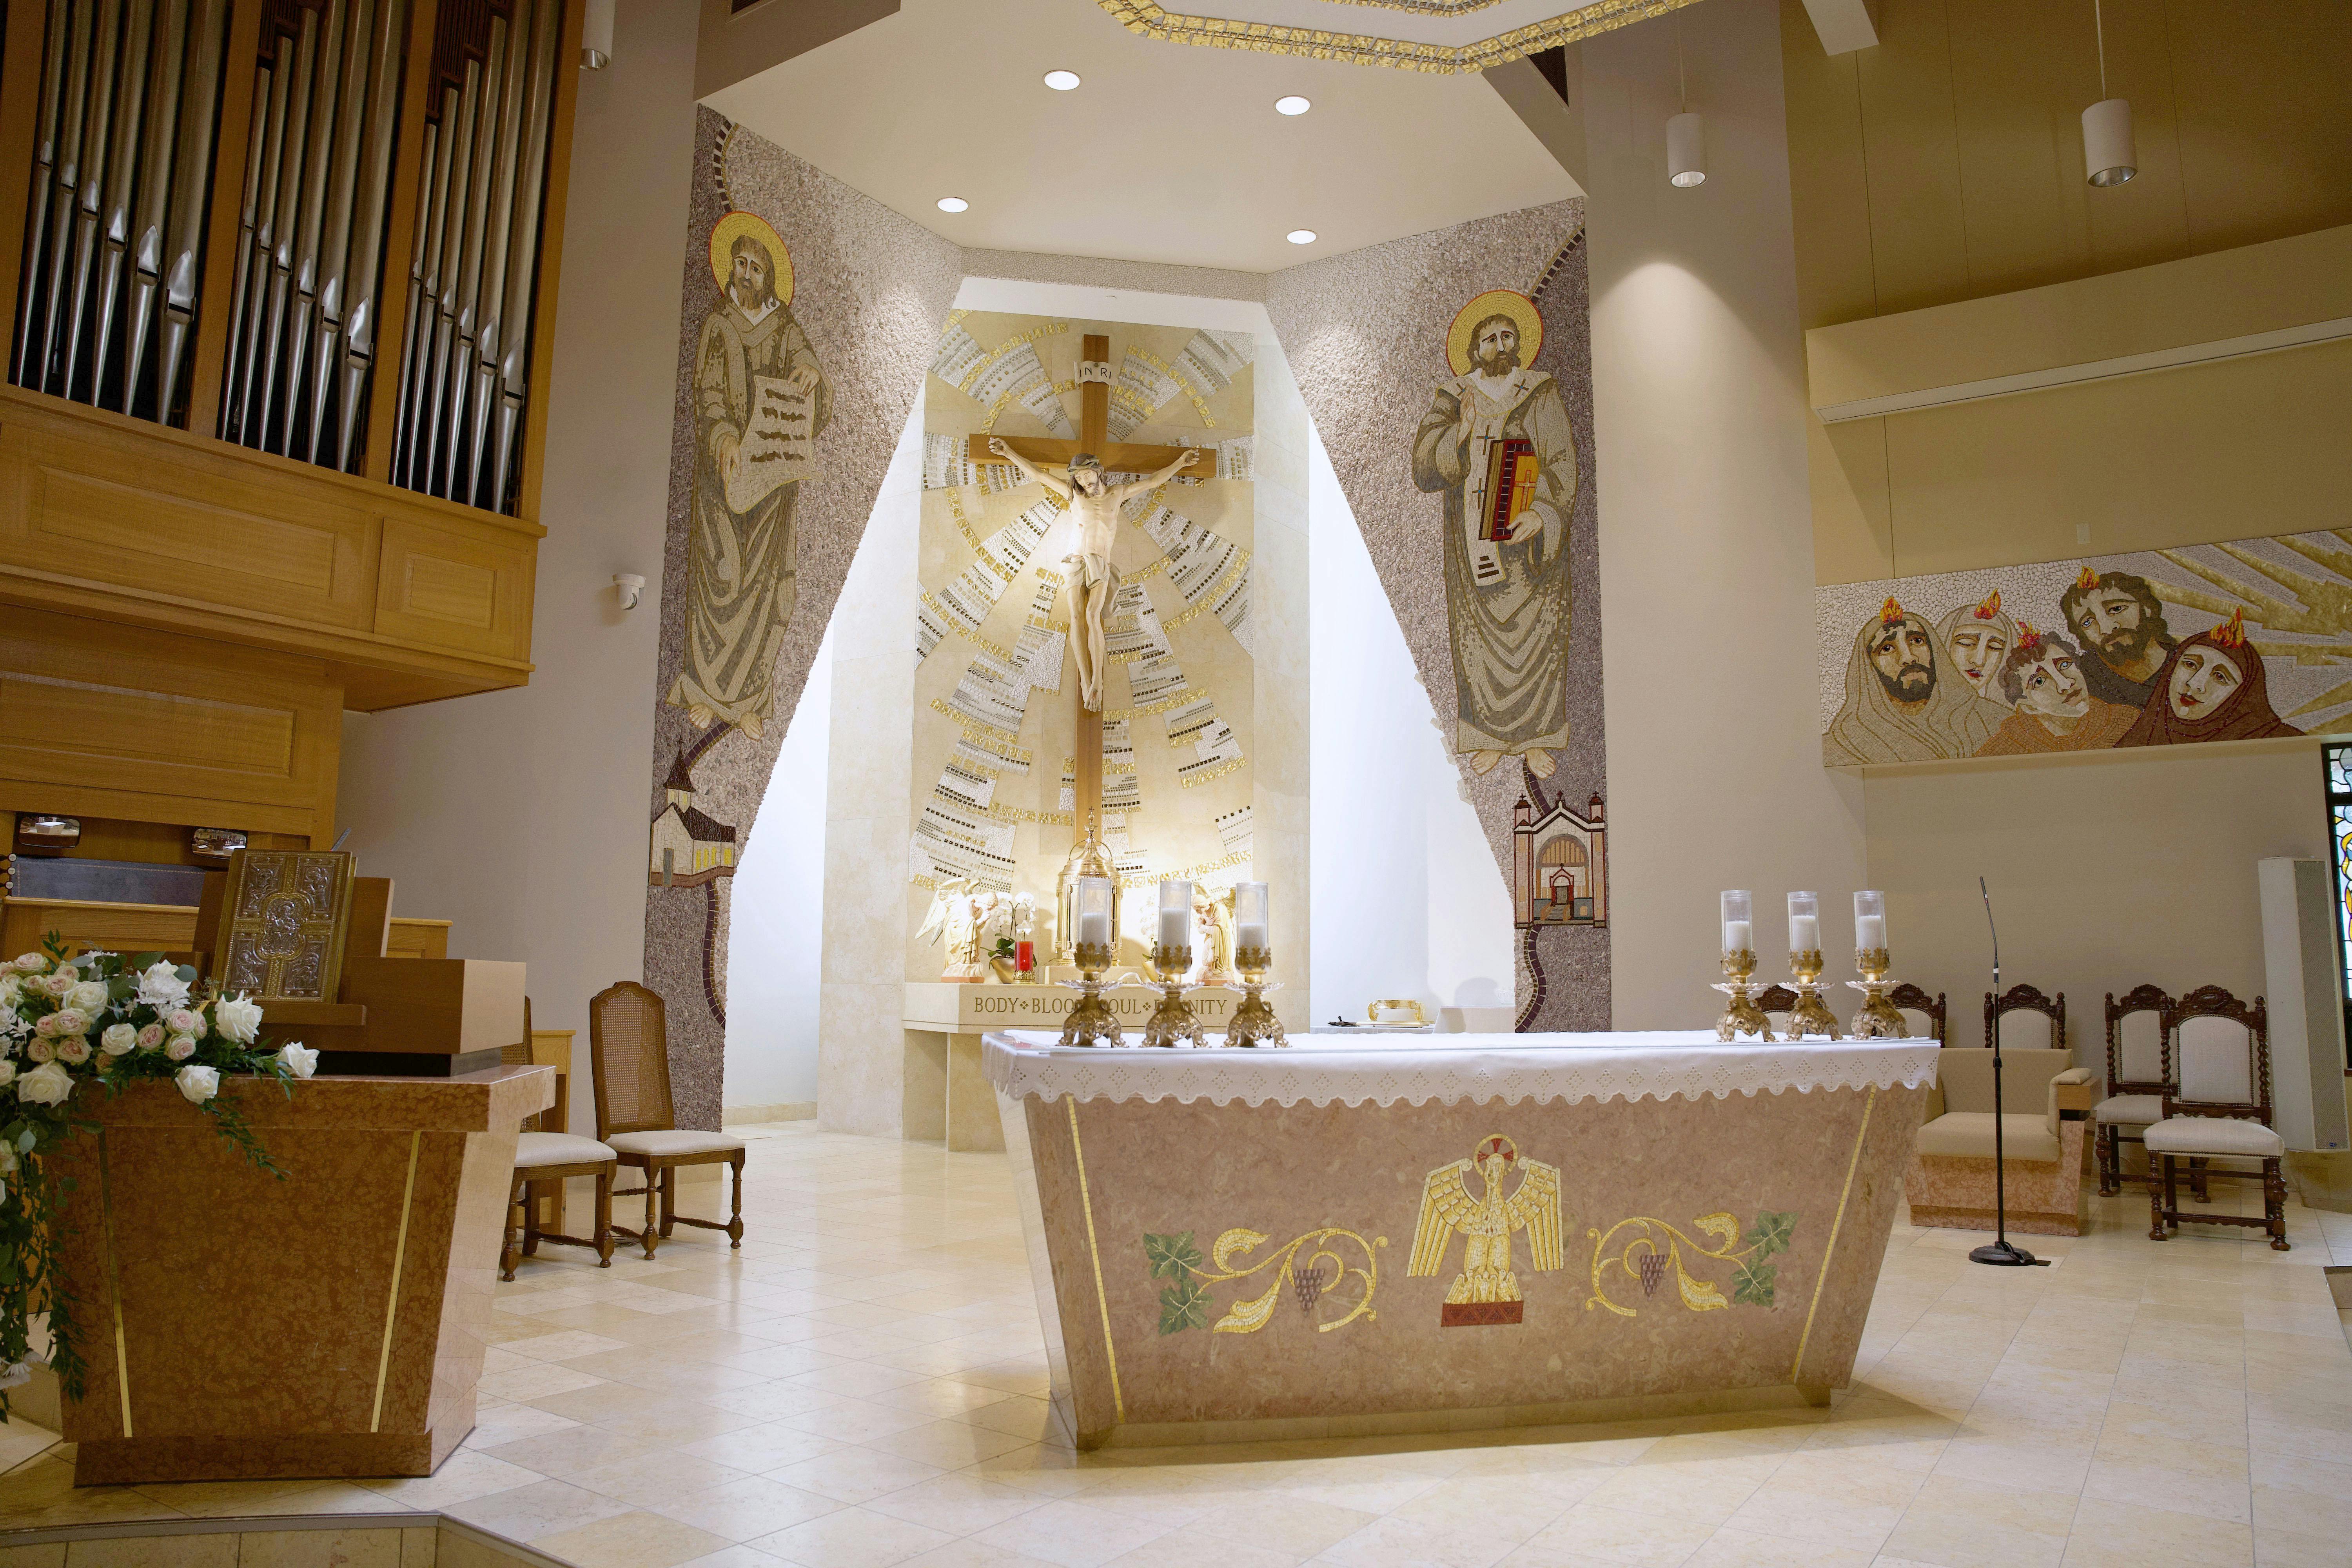 The altar is now flanked by images of SS. Cyril and Methodius, the patrons of the Slovak people. An image of the small wooden church that was first built by Slovak immigrants in the city of Detroit in 1918 is to the left of the altar. On the right is an image of the second structure, which remained the parish's home until 1988 when the community moved from the city to the suburbs.